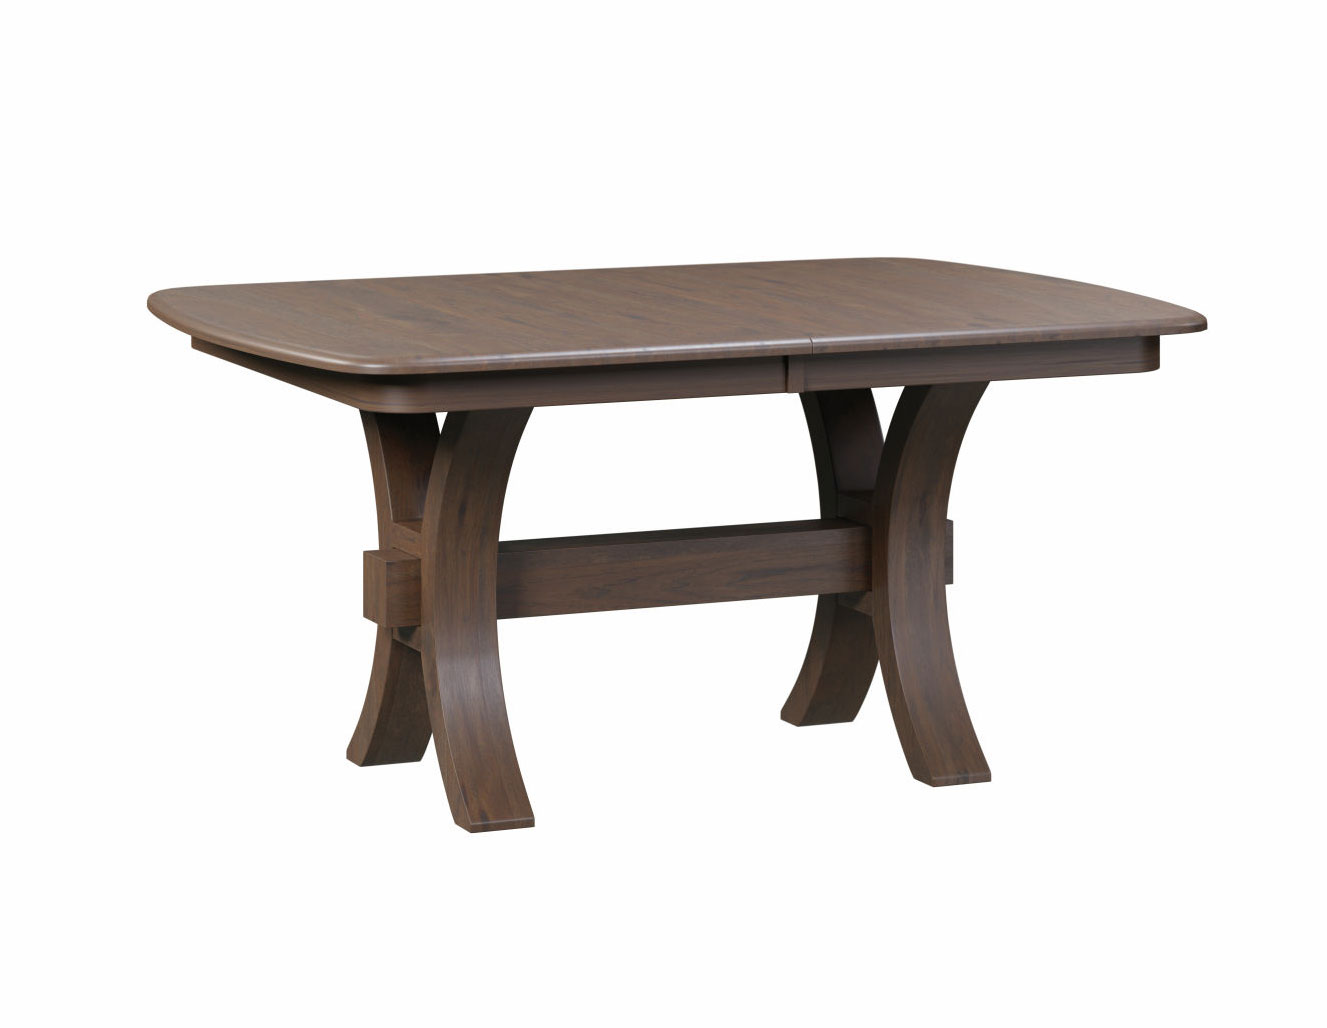 Zehr Single Pedestal Table shown in Rustic Hickory with OCS-119 Cappucino